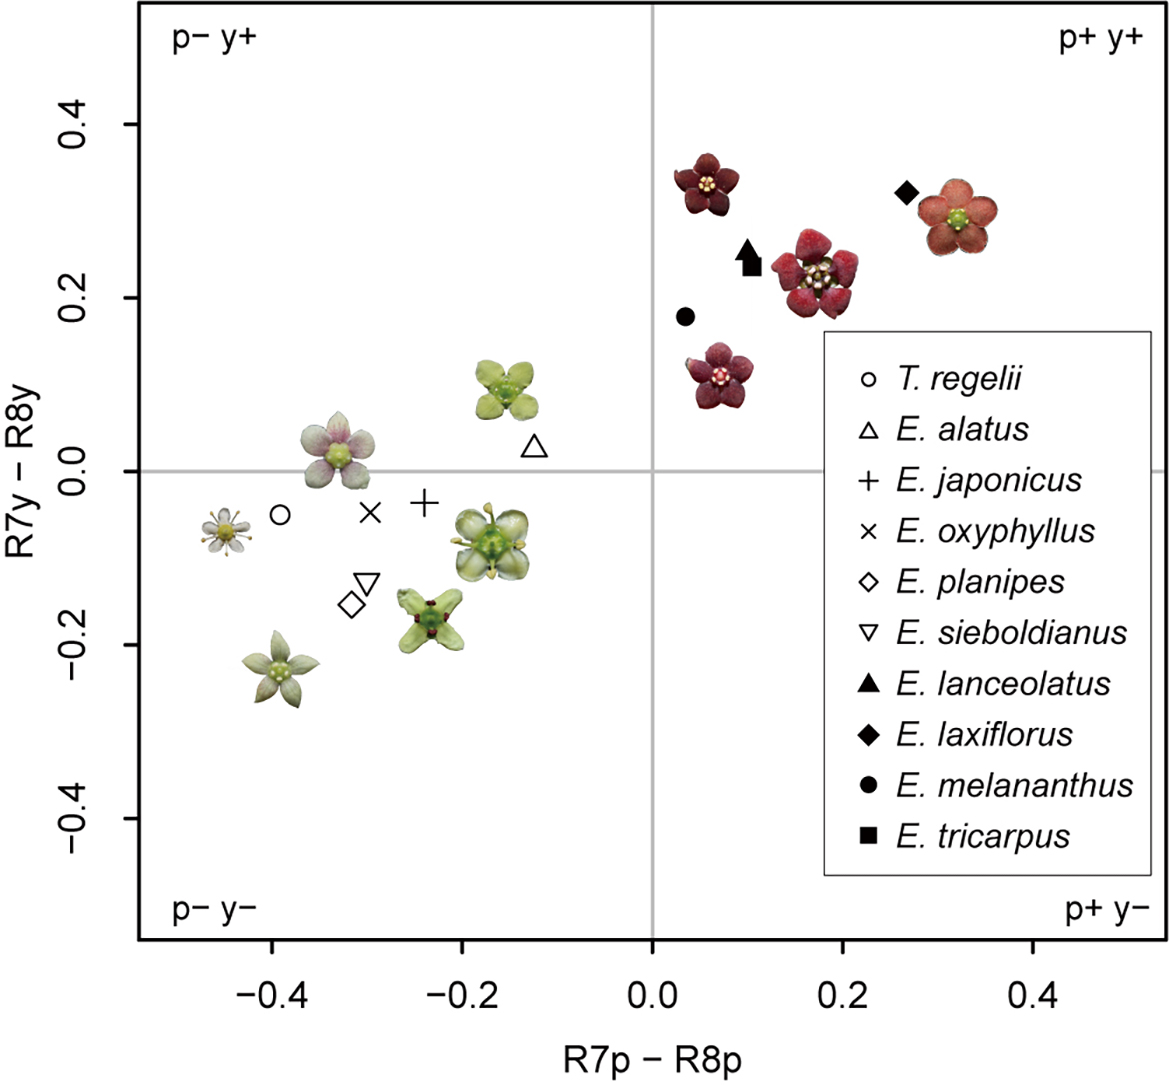 A chart showing how 10 flowers from the Euonymus group may appear as different colours in the eyes of fungus gnats.